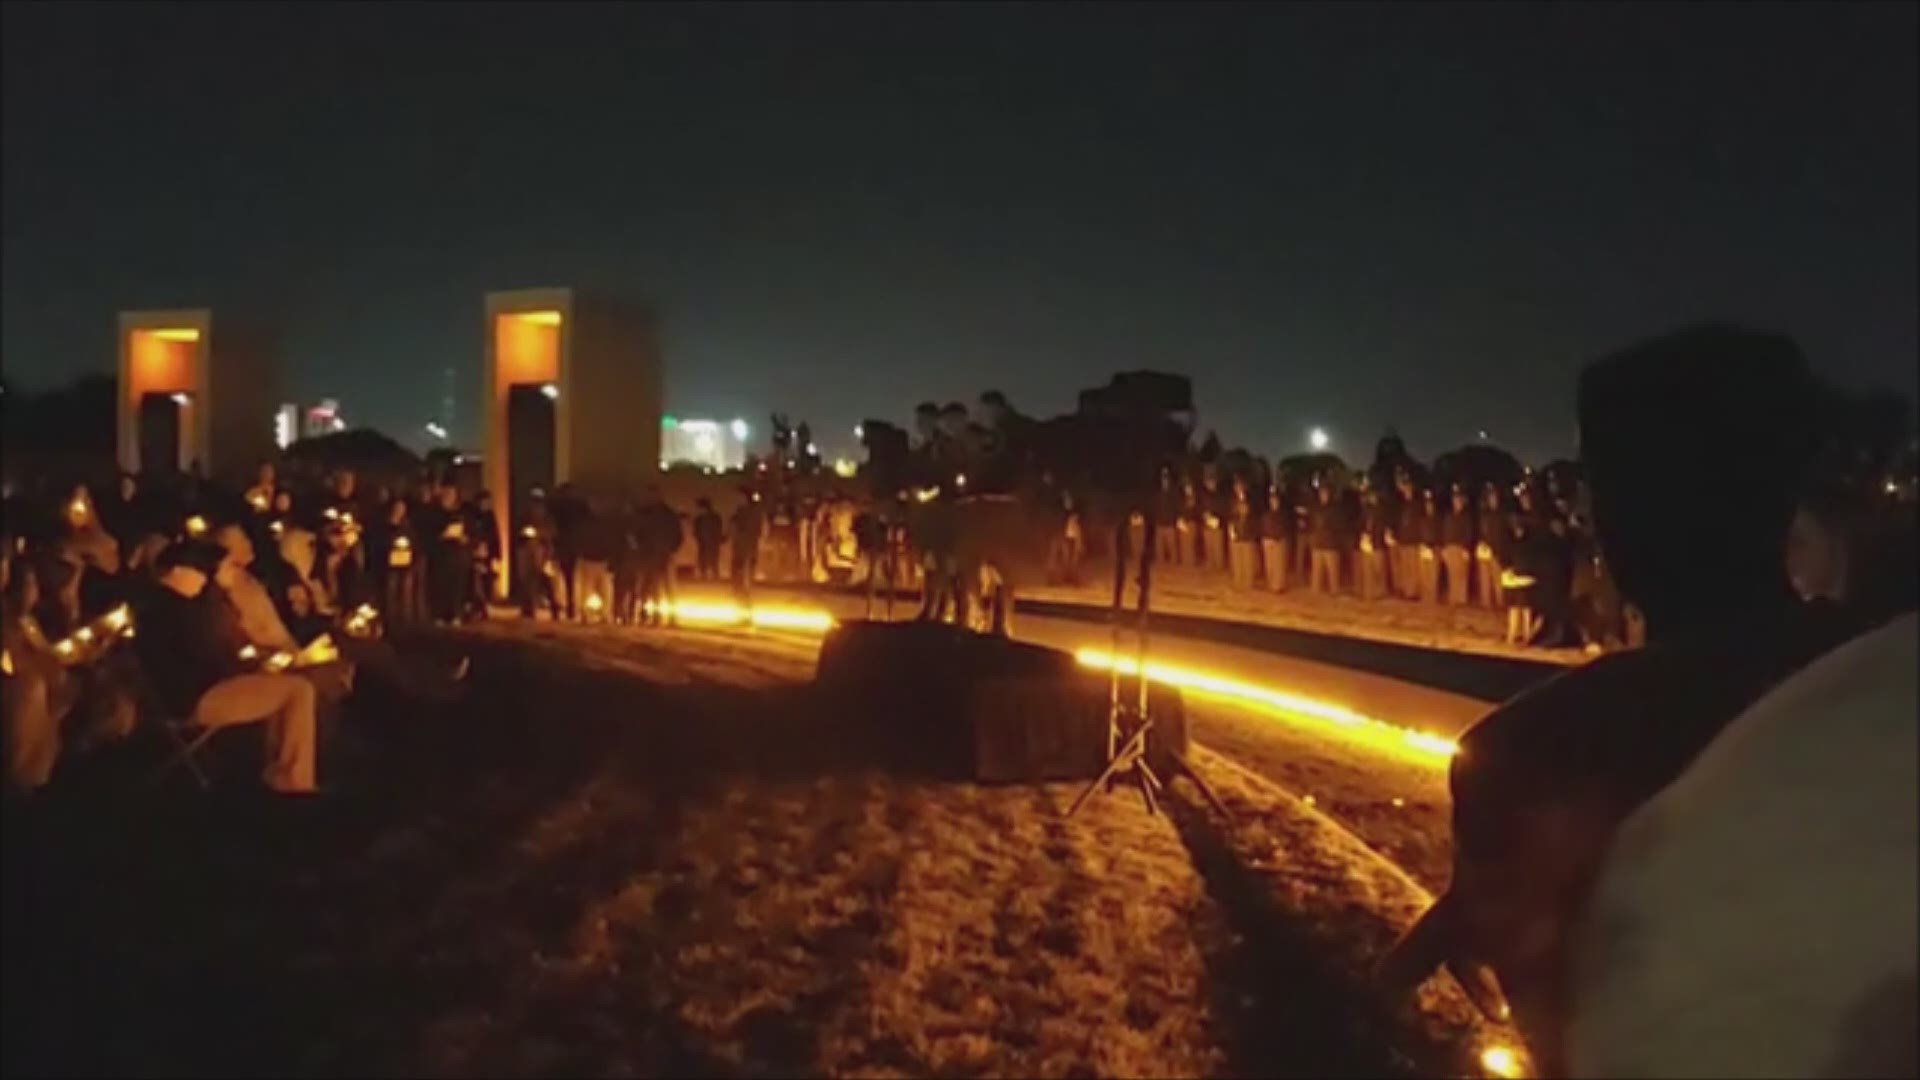 People gathered at Bonfire Memorial honored the lives lost 20 years ago.